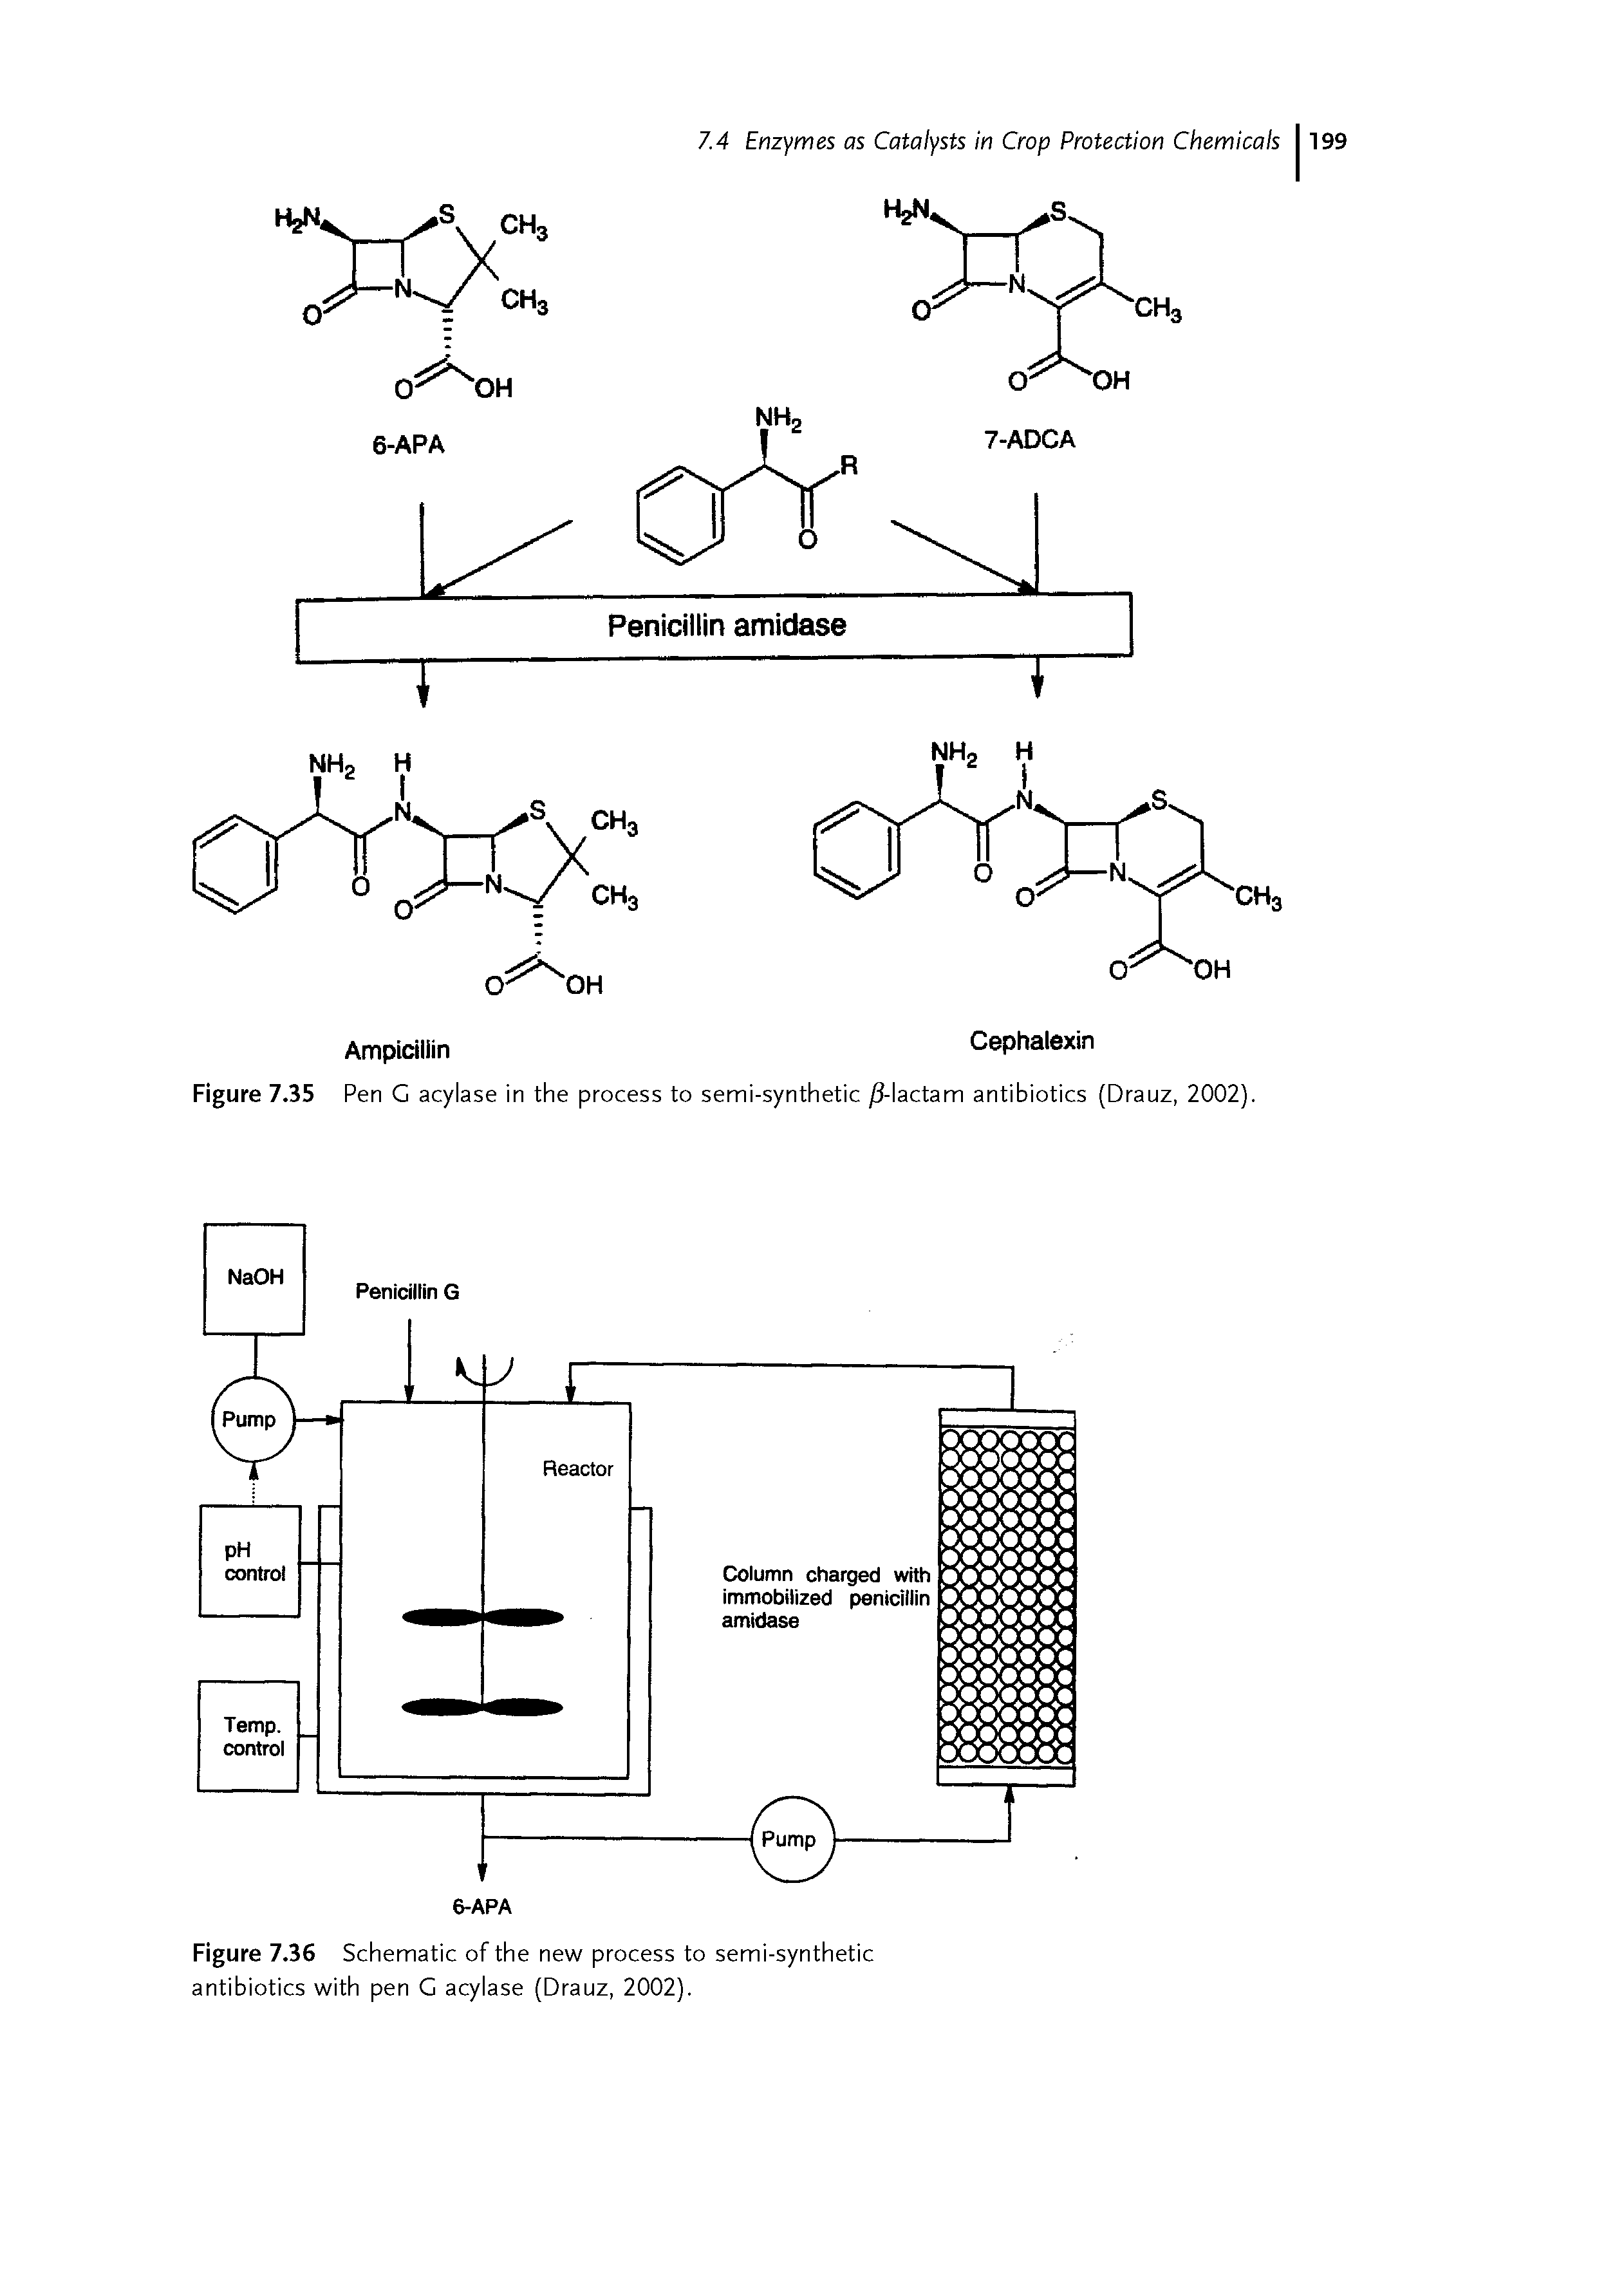 Figure 7.36 Schematic of the new process to semi-synthetic antibiotics with pen G acylase (Drauz, 2002).